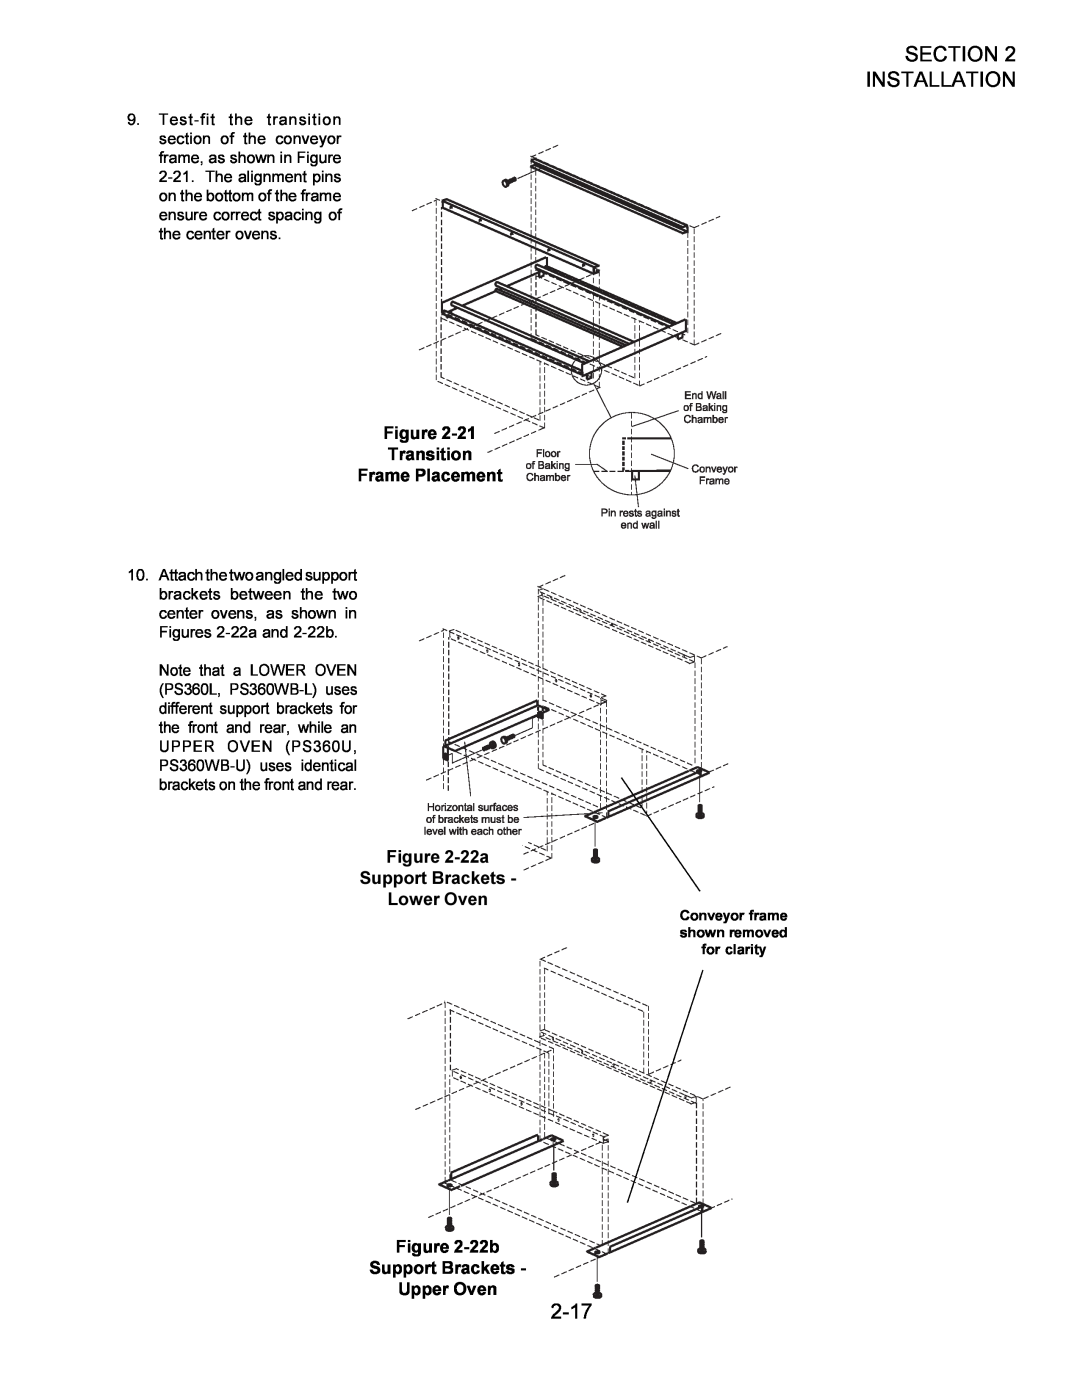 Middleby Marshall 2-17, Transition Frame Placement, 22a Support Brackets Lower Oven -22b, Support Brackets Upper Oven 